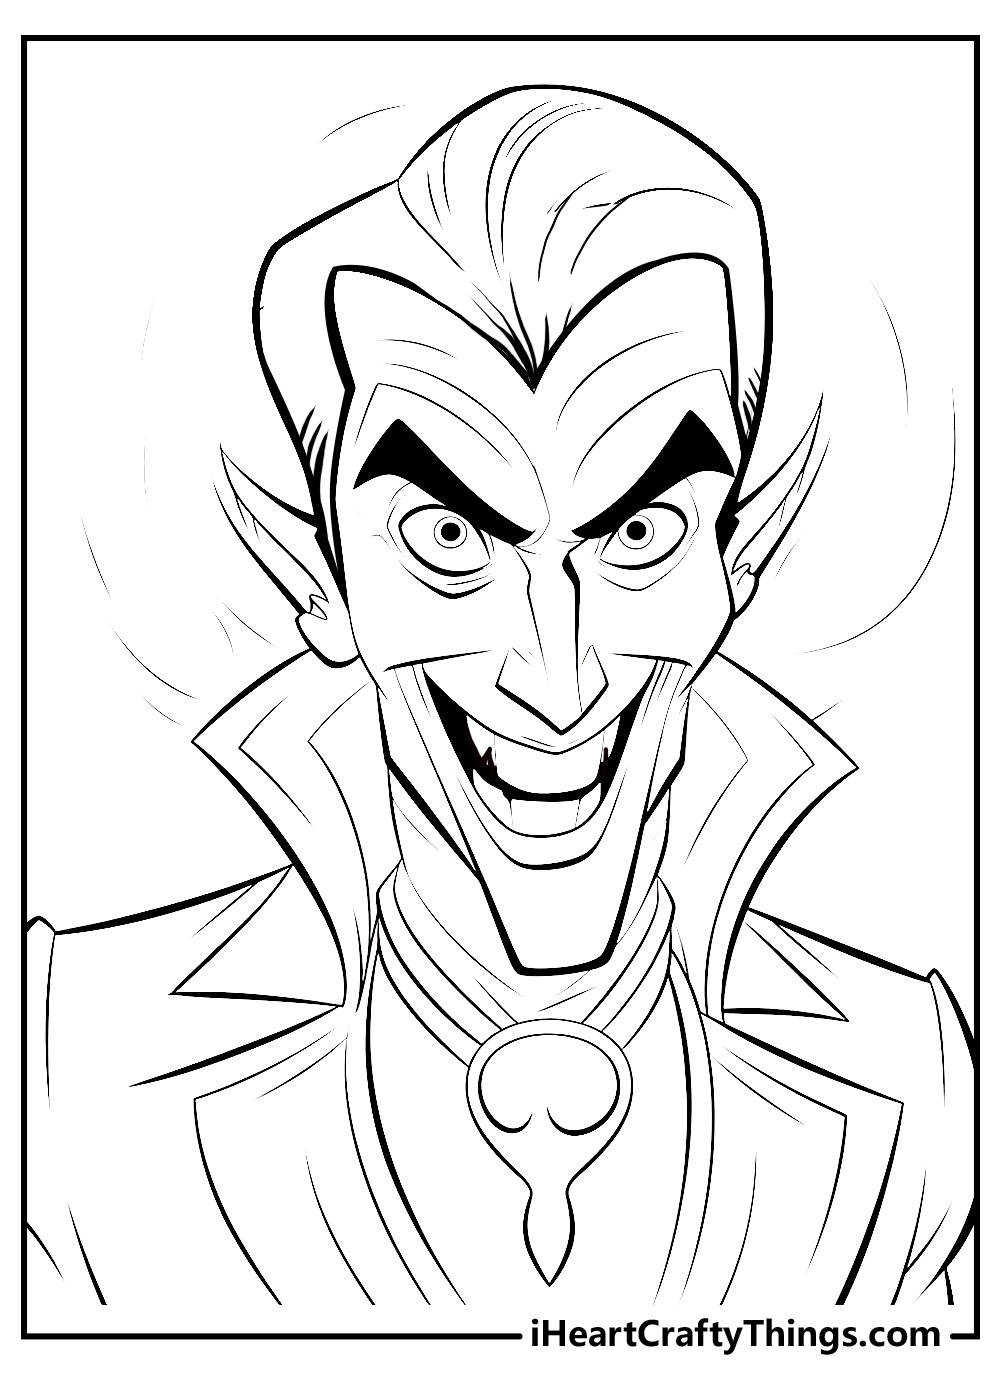 Count Dracula coloring pages for kids